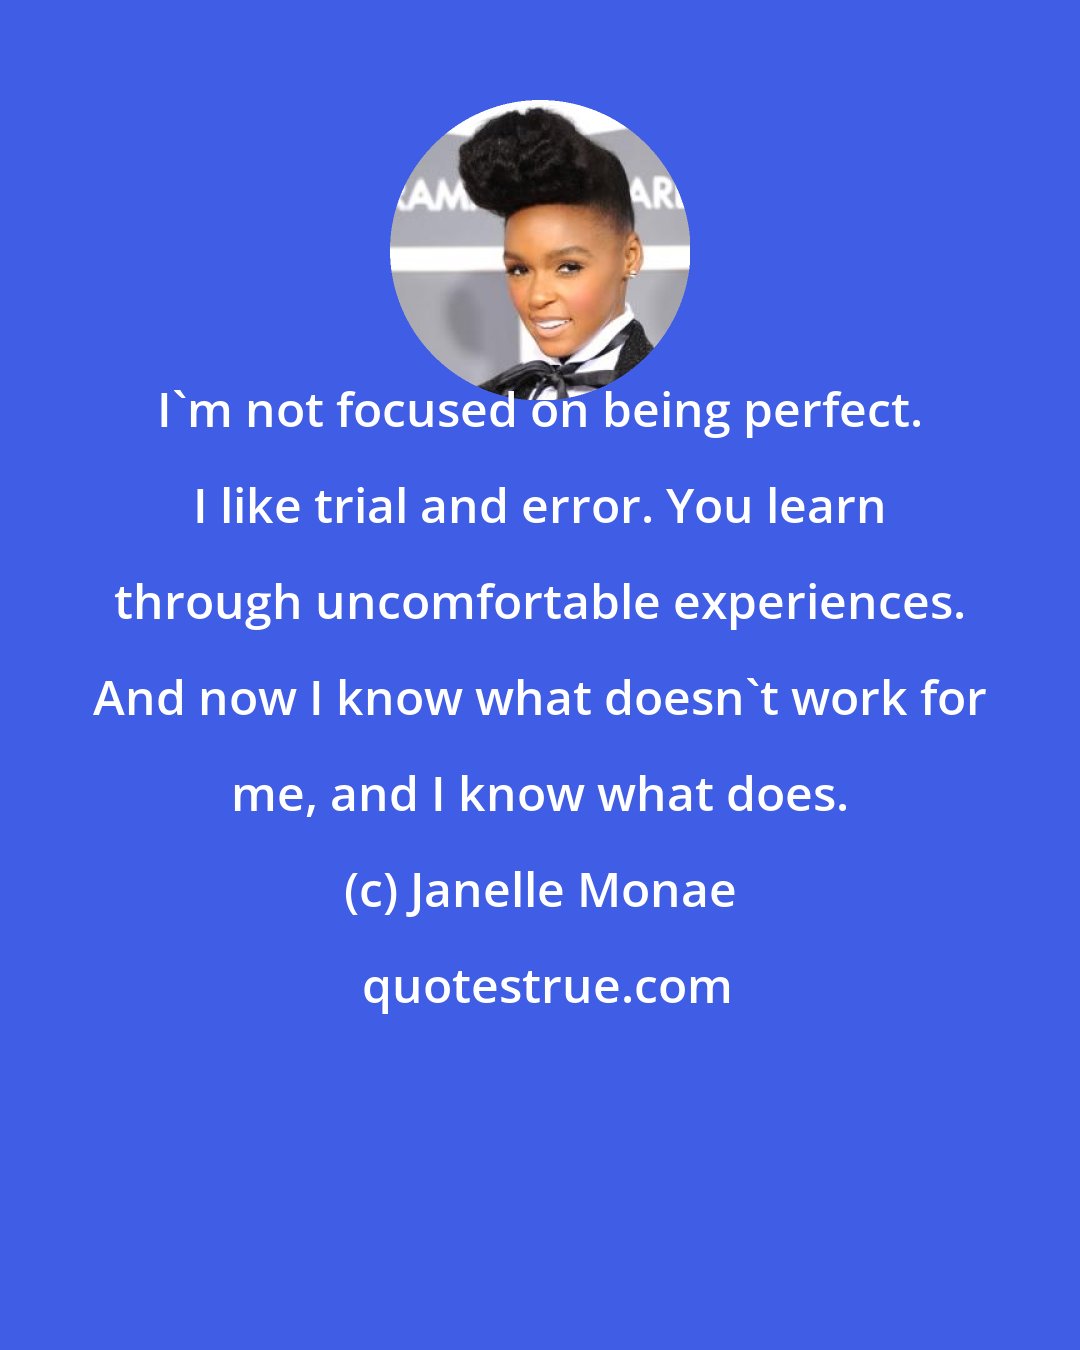 Janelle Monae: I'm not focused on being perfect. I like trial and error. You learn through uncomfortable experiences. And now I know what doesn't work for me, and I know what does.